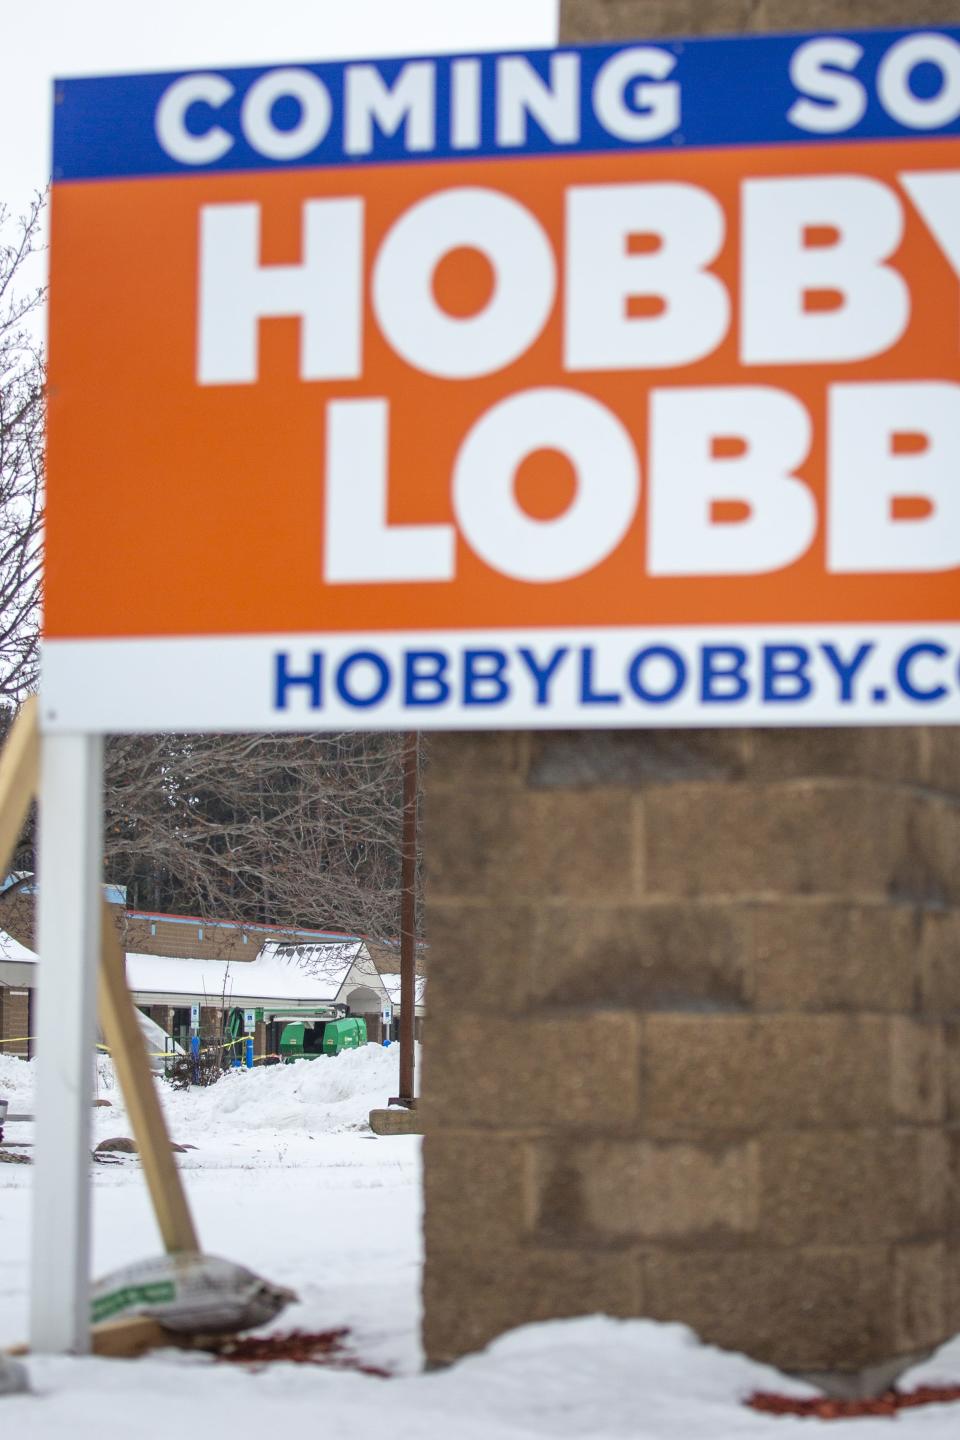 Construction continues in the snow and cold on Jan. 23 for the new Hobby Lobby at 5657 U.S. 10 E. in Stevens Point.